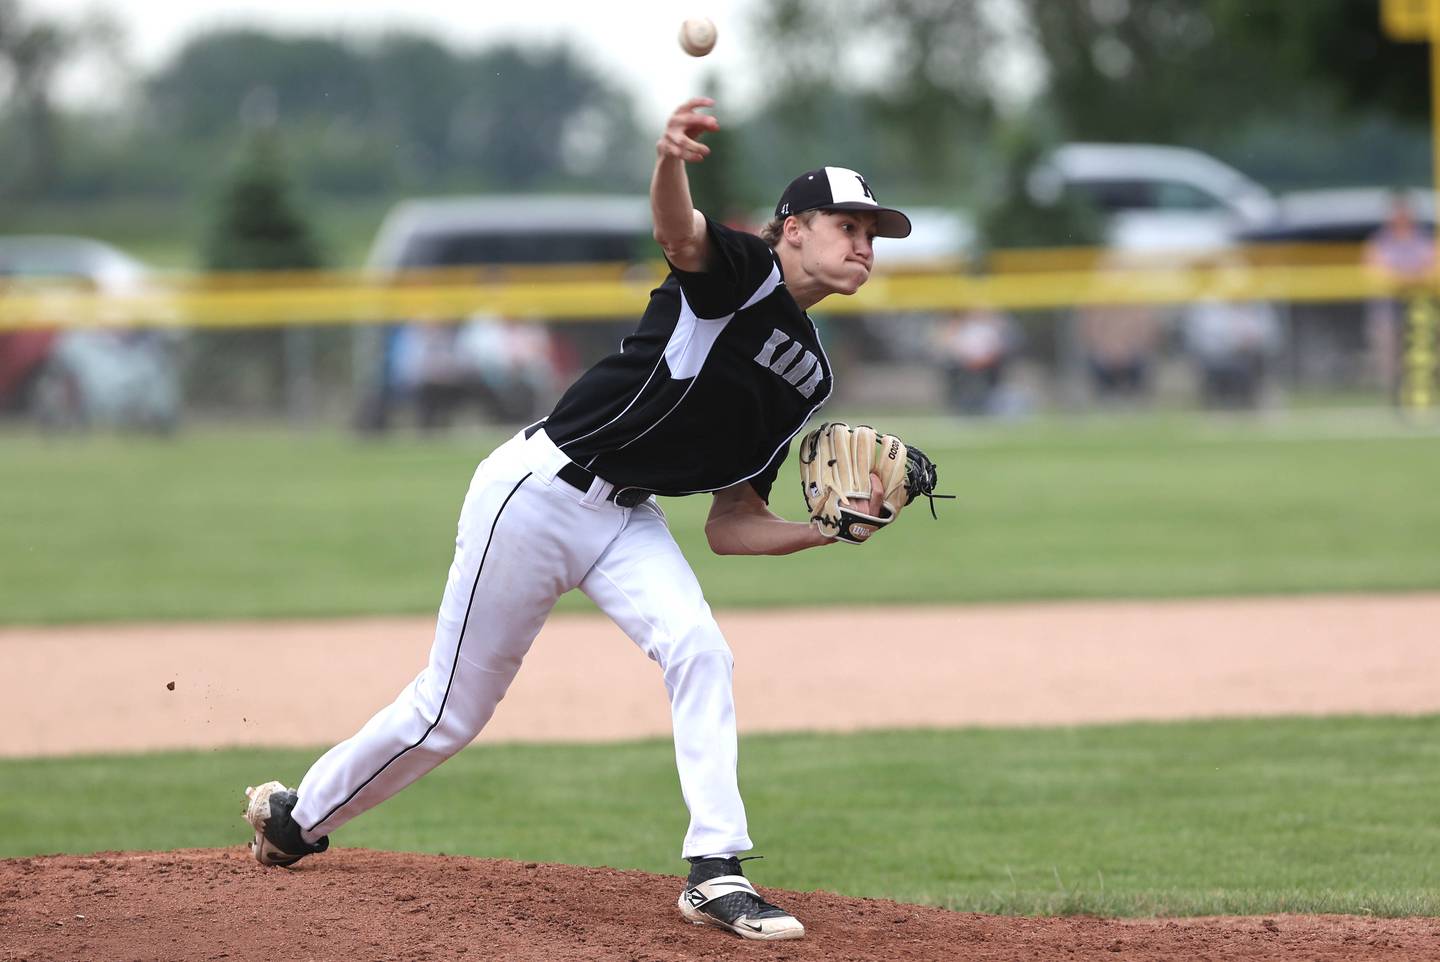 Kaneland's Logan Kottmeyer throws a pitch Saturday, June 4, 2022, during their IHSA Class 3A Sectional final game against Sycamore at the Sycamore Community Sports Complex.